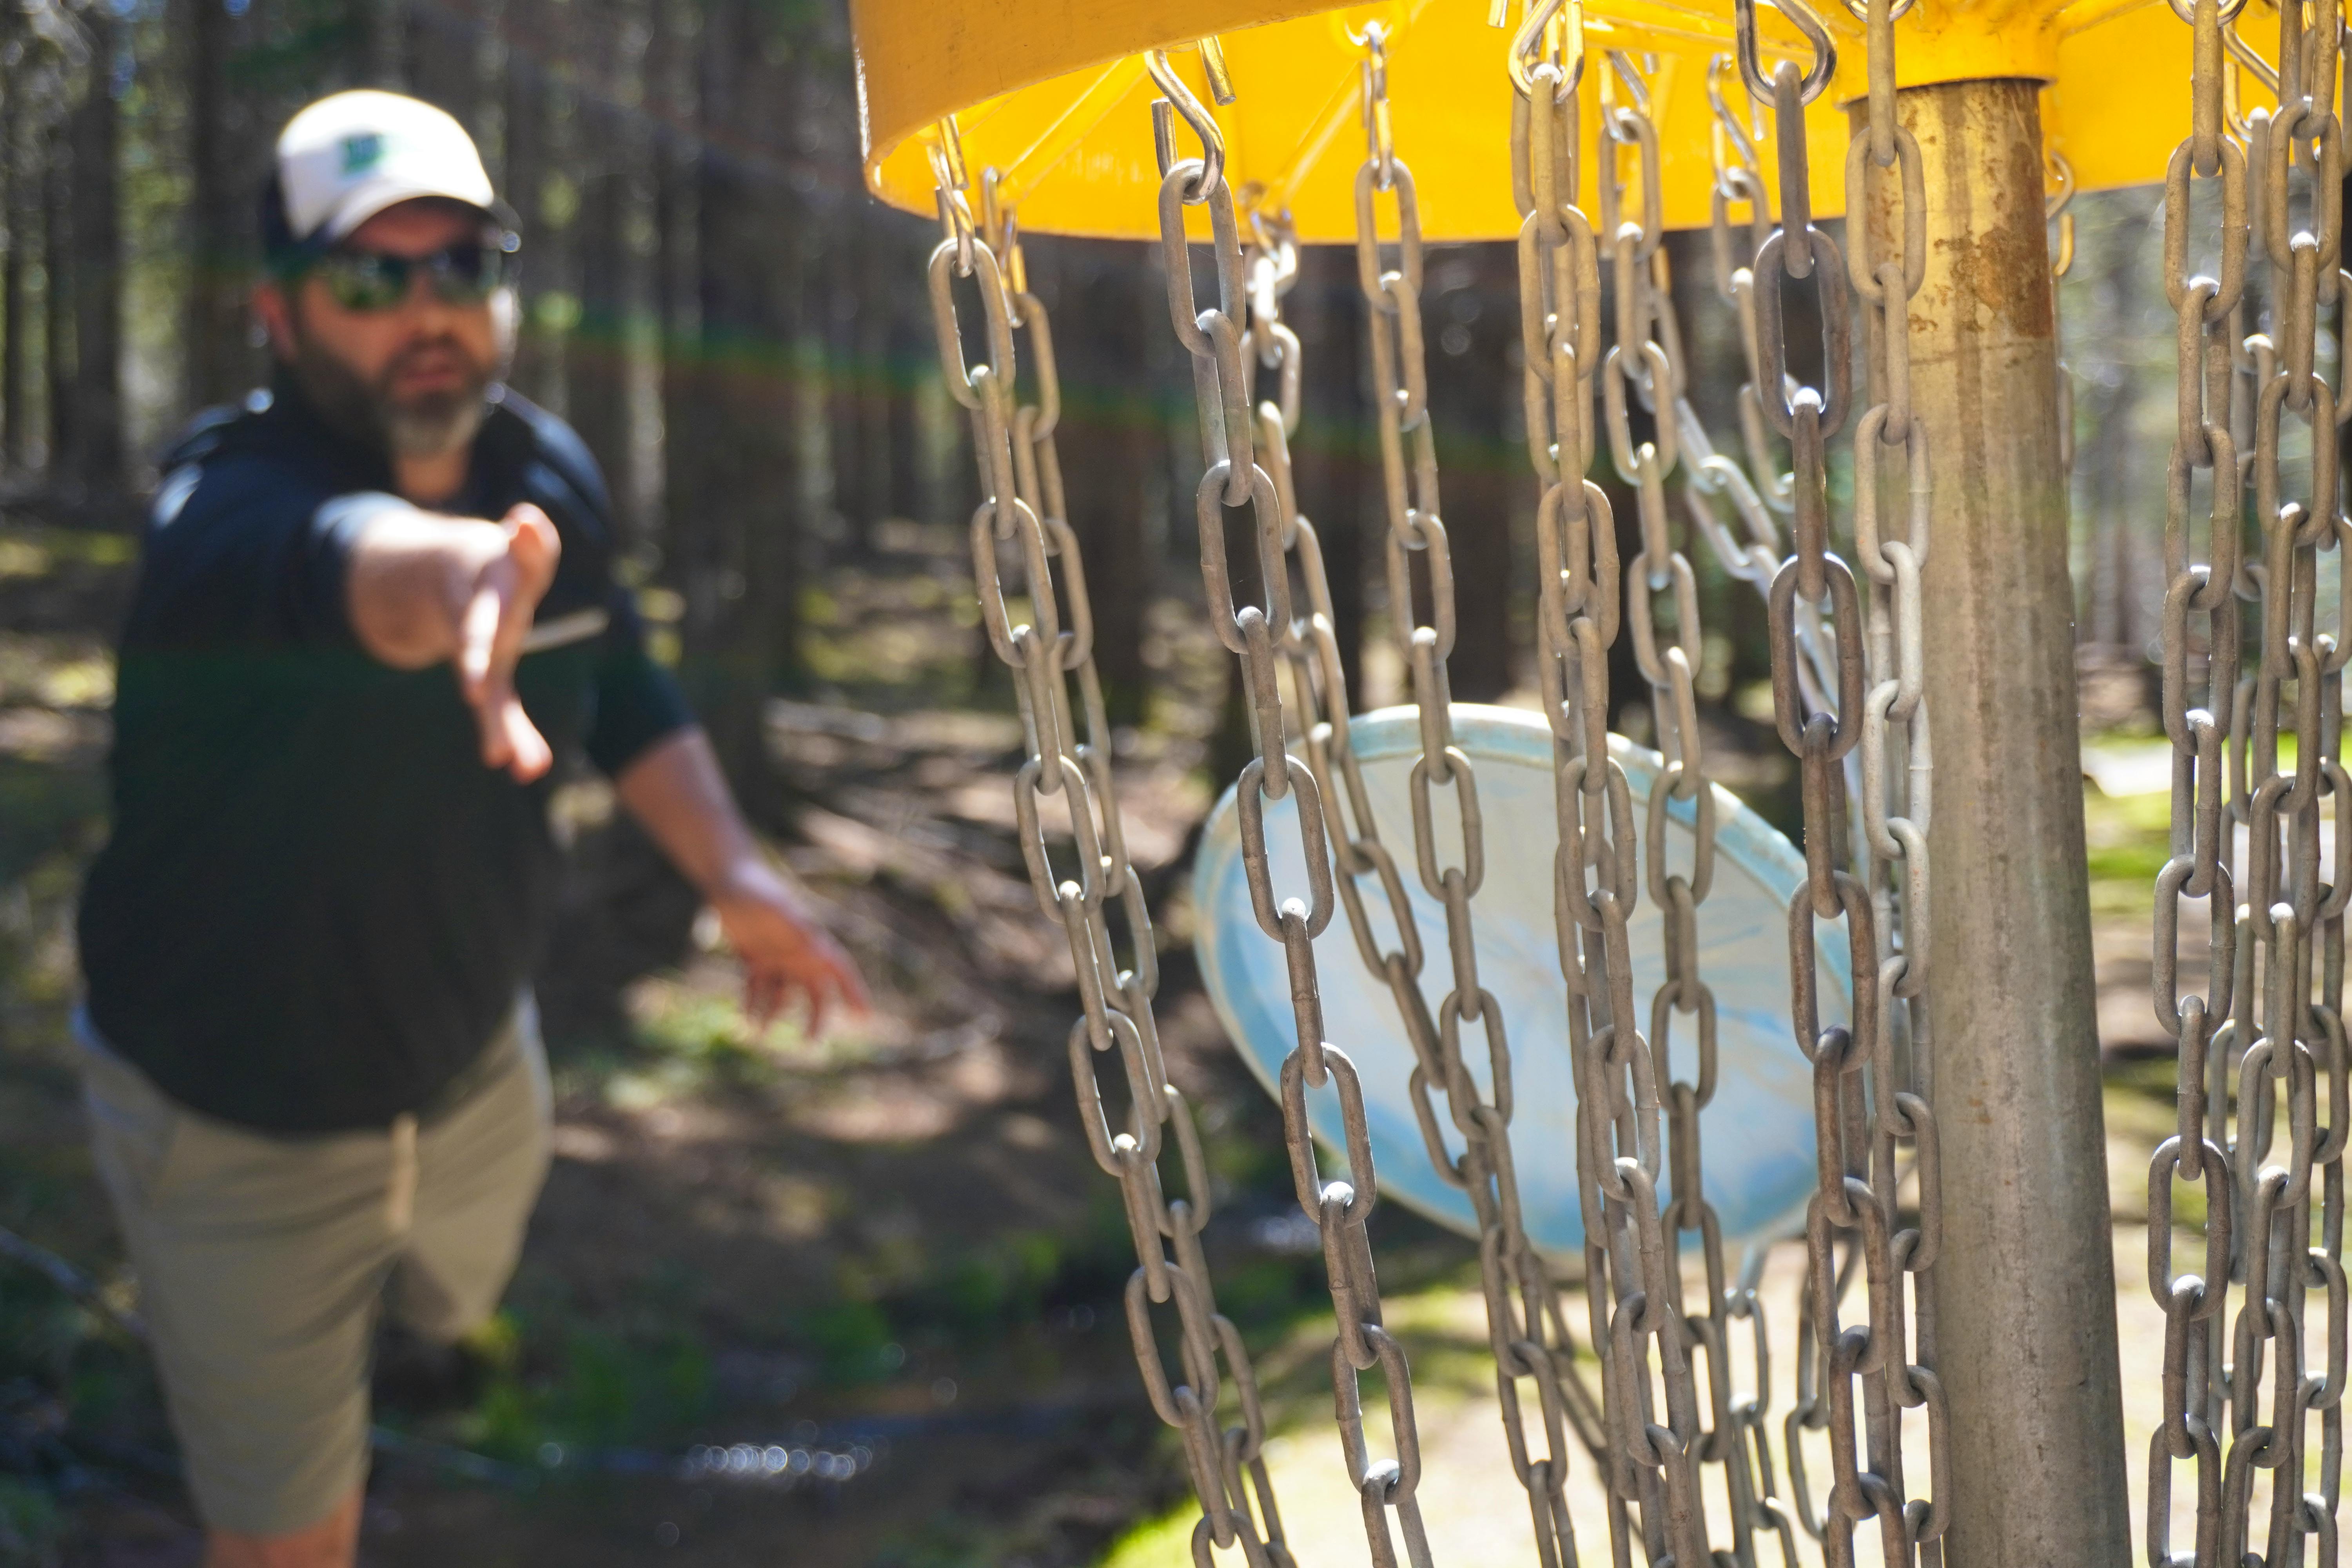 Jacob Smith, owner of Island Disc Golf Company, hits the target at Hillcrest Farm Disc Golf in Bonshaw on May 20.